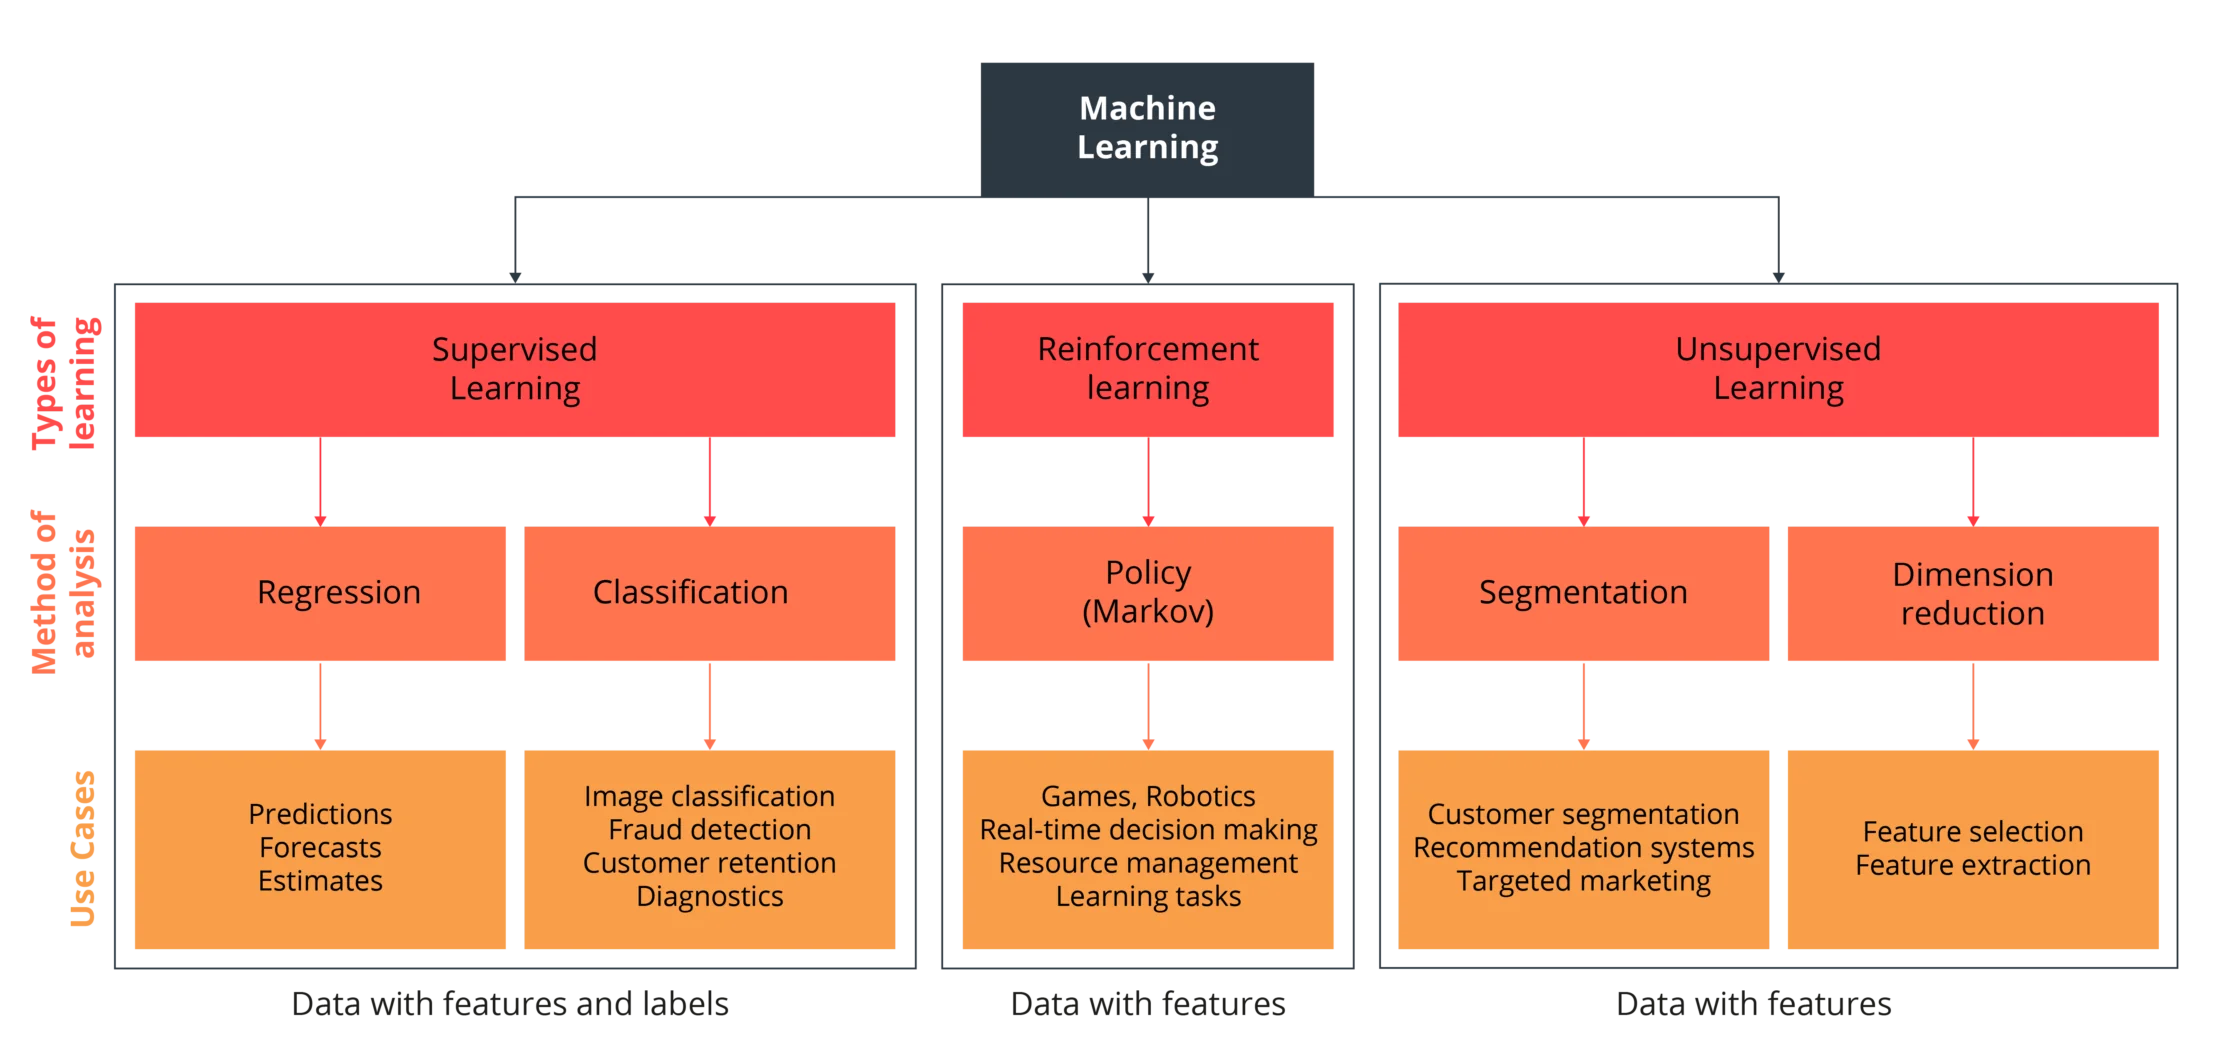 This diagram shows a machine learning model.